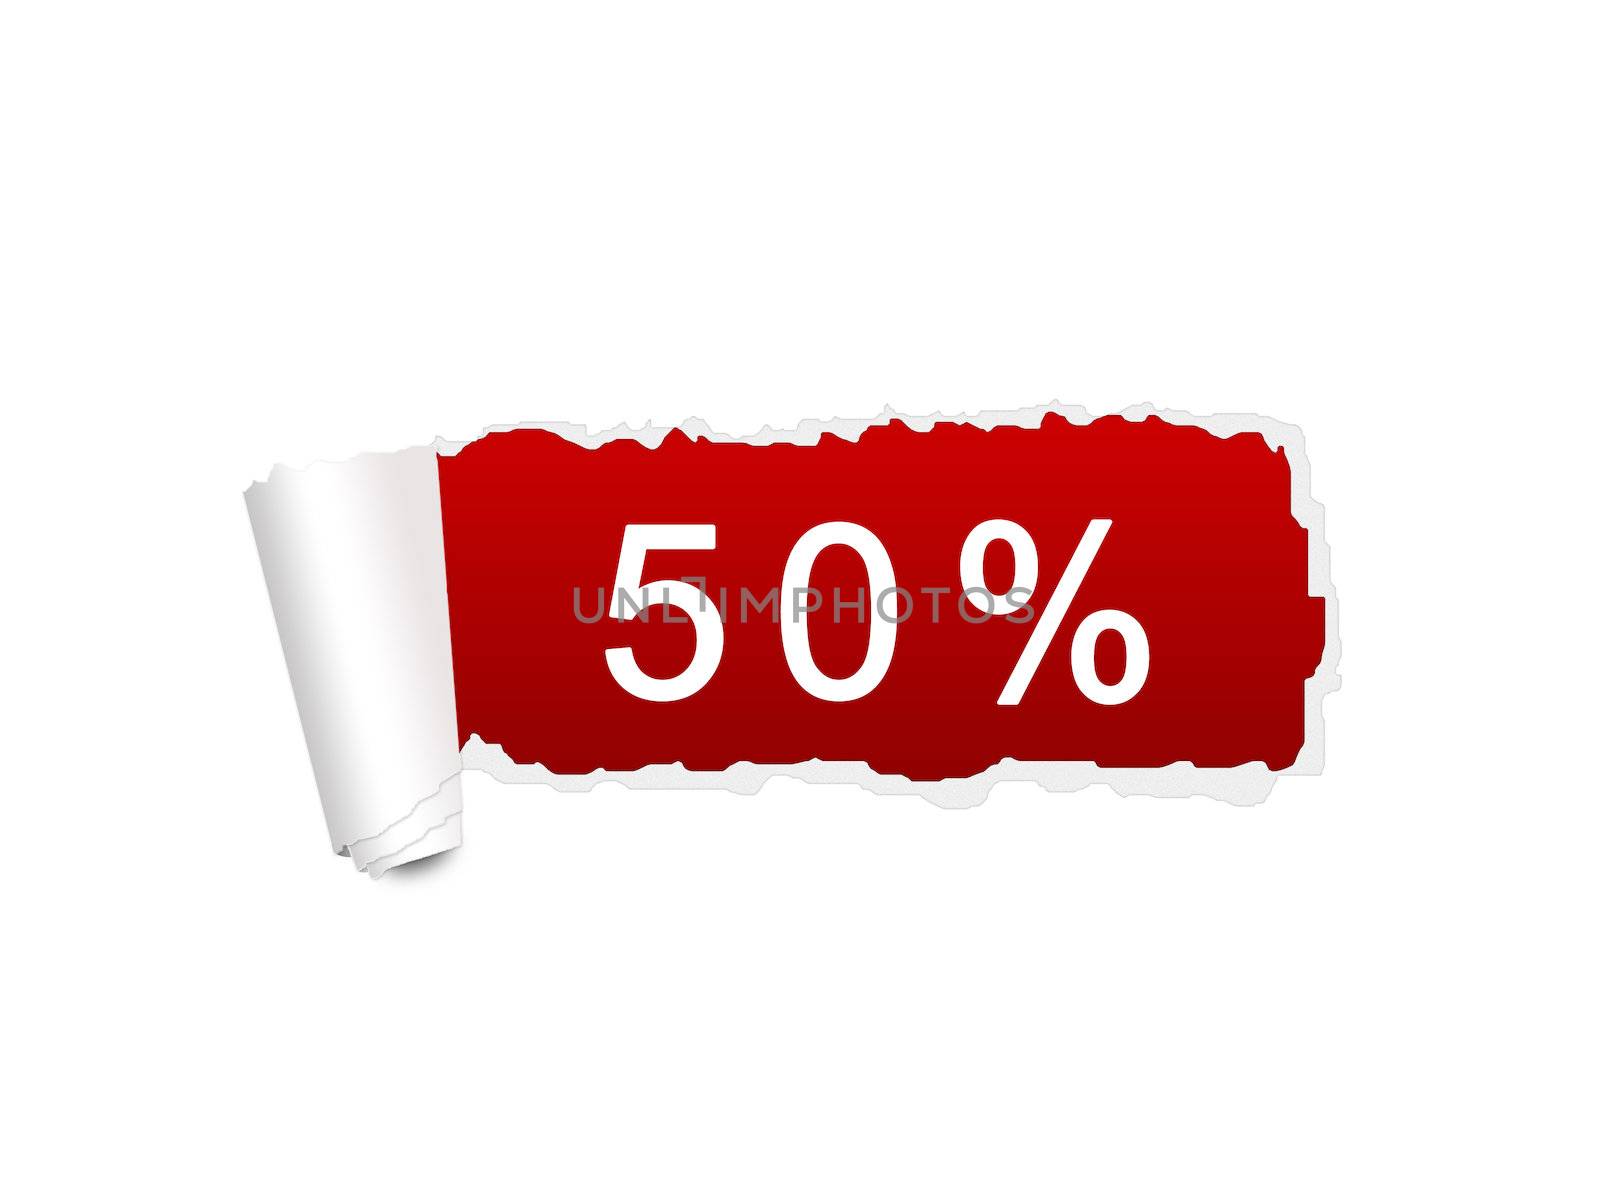 50 % discount sale on the ripped paper background by Dddaca